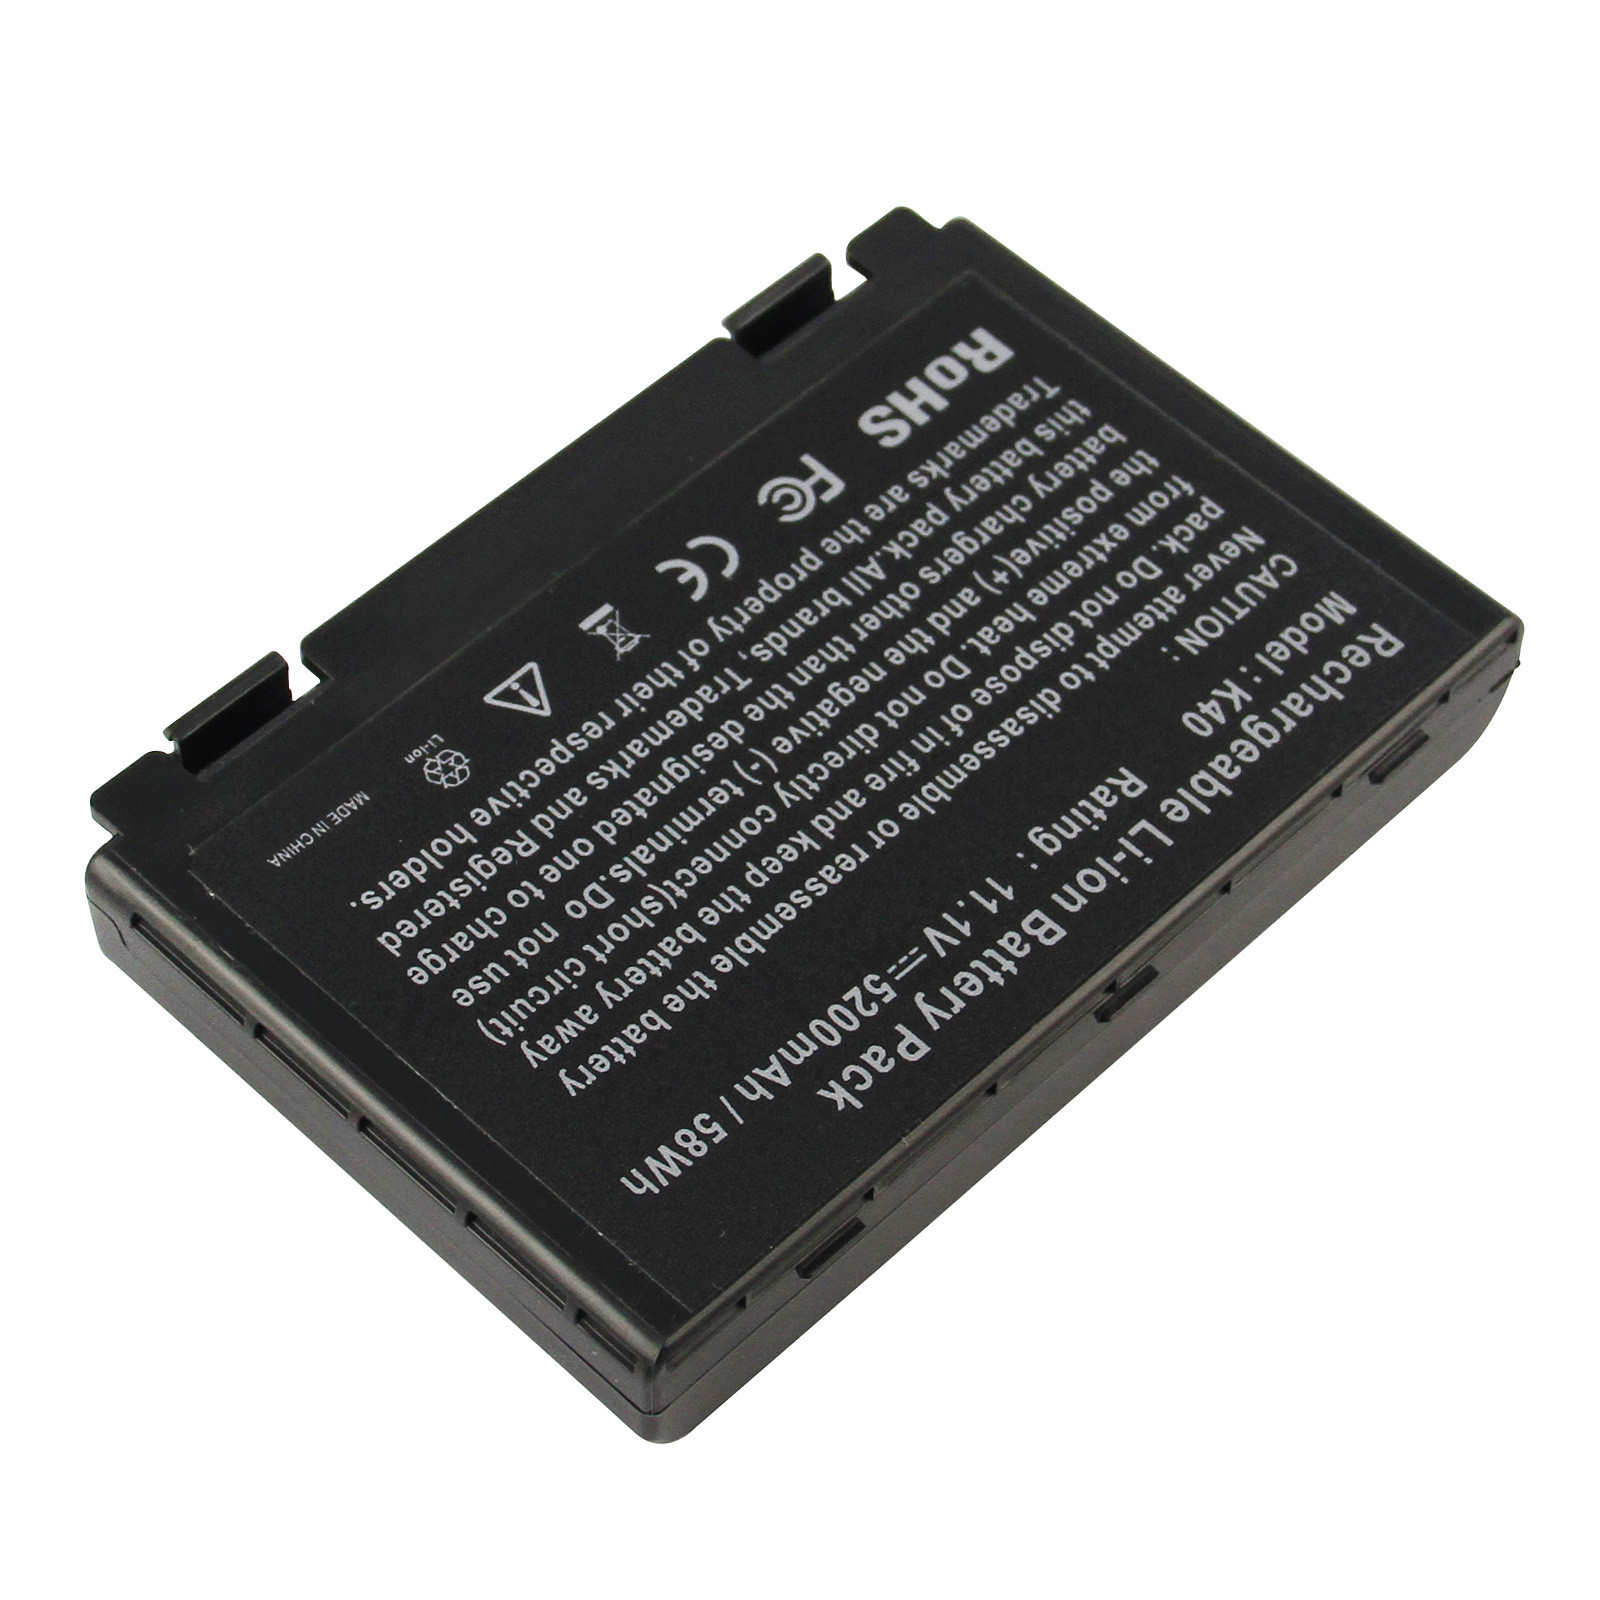  Rechargeable 11.1 V 5200mAh Custom Lithium Battery Packs Manufactures